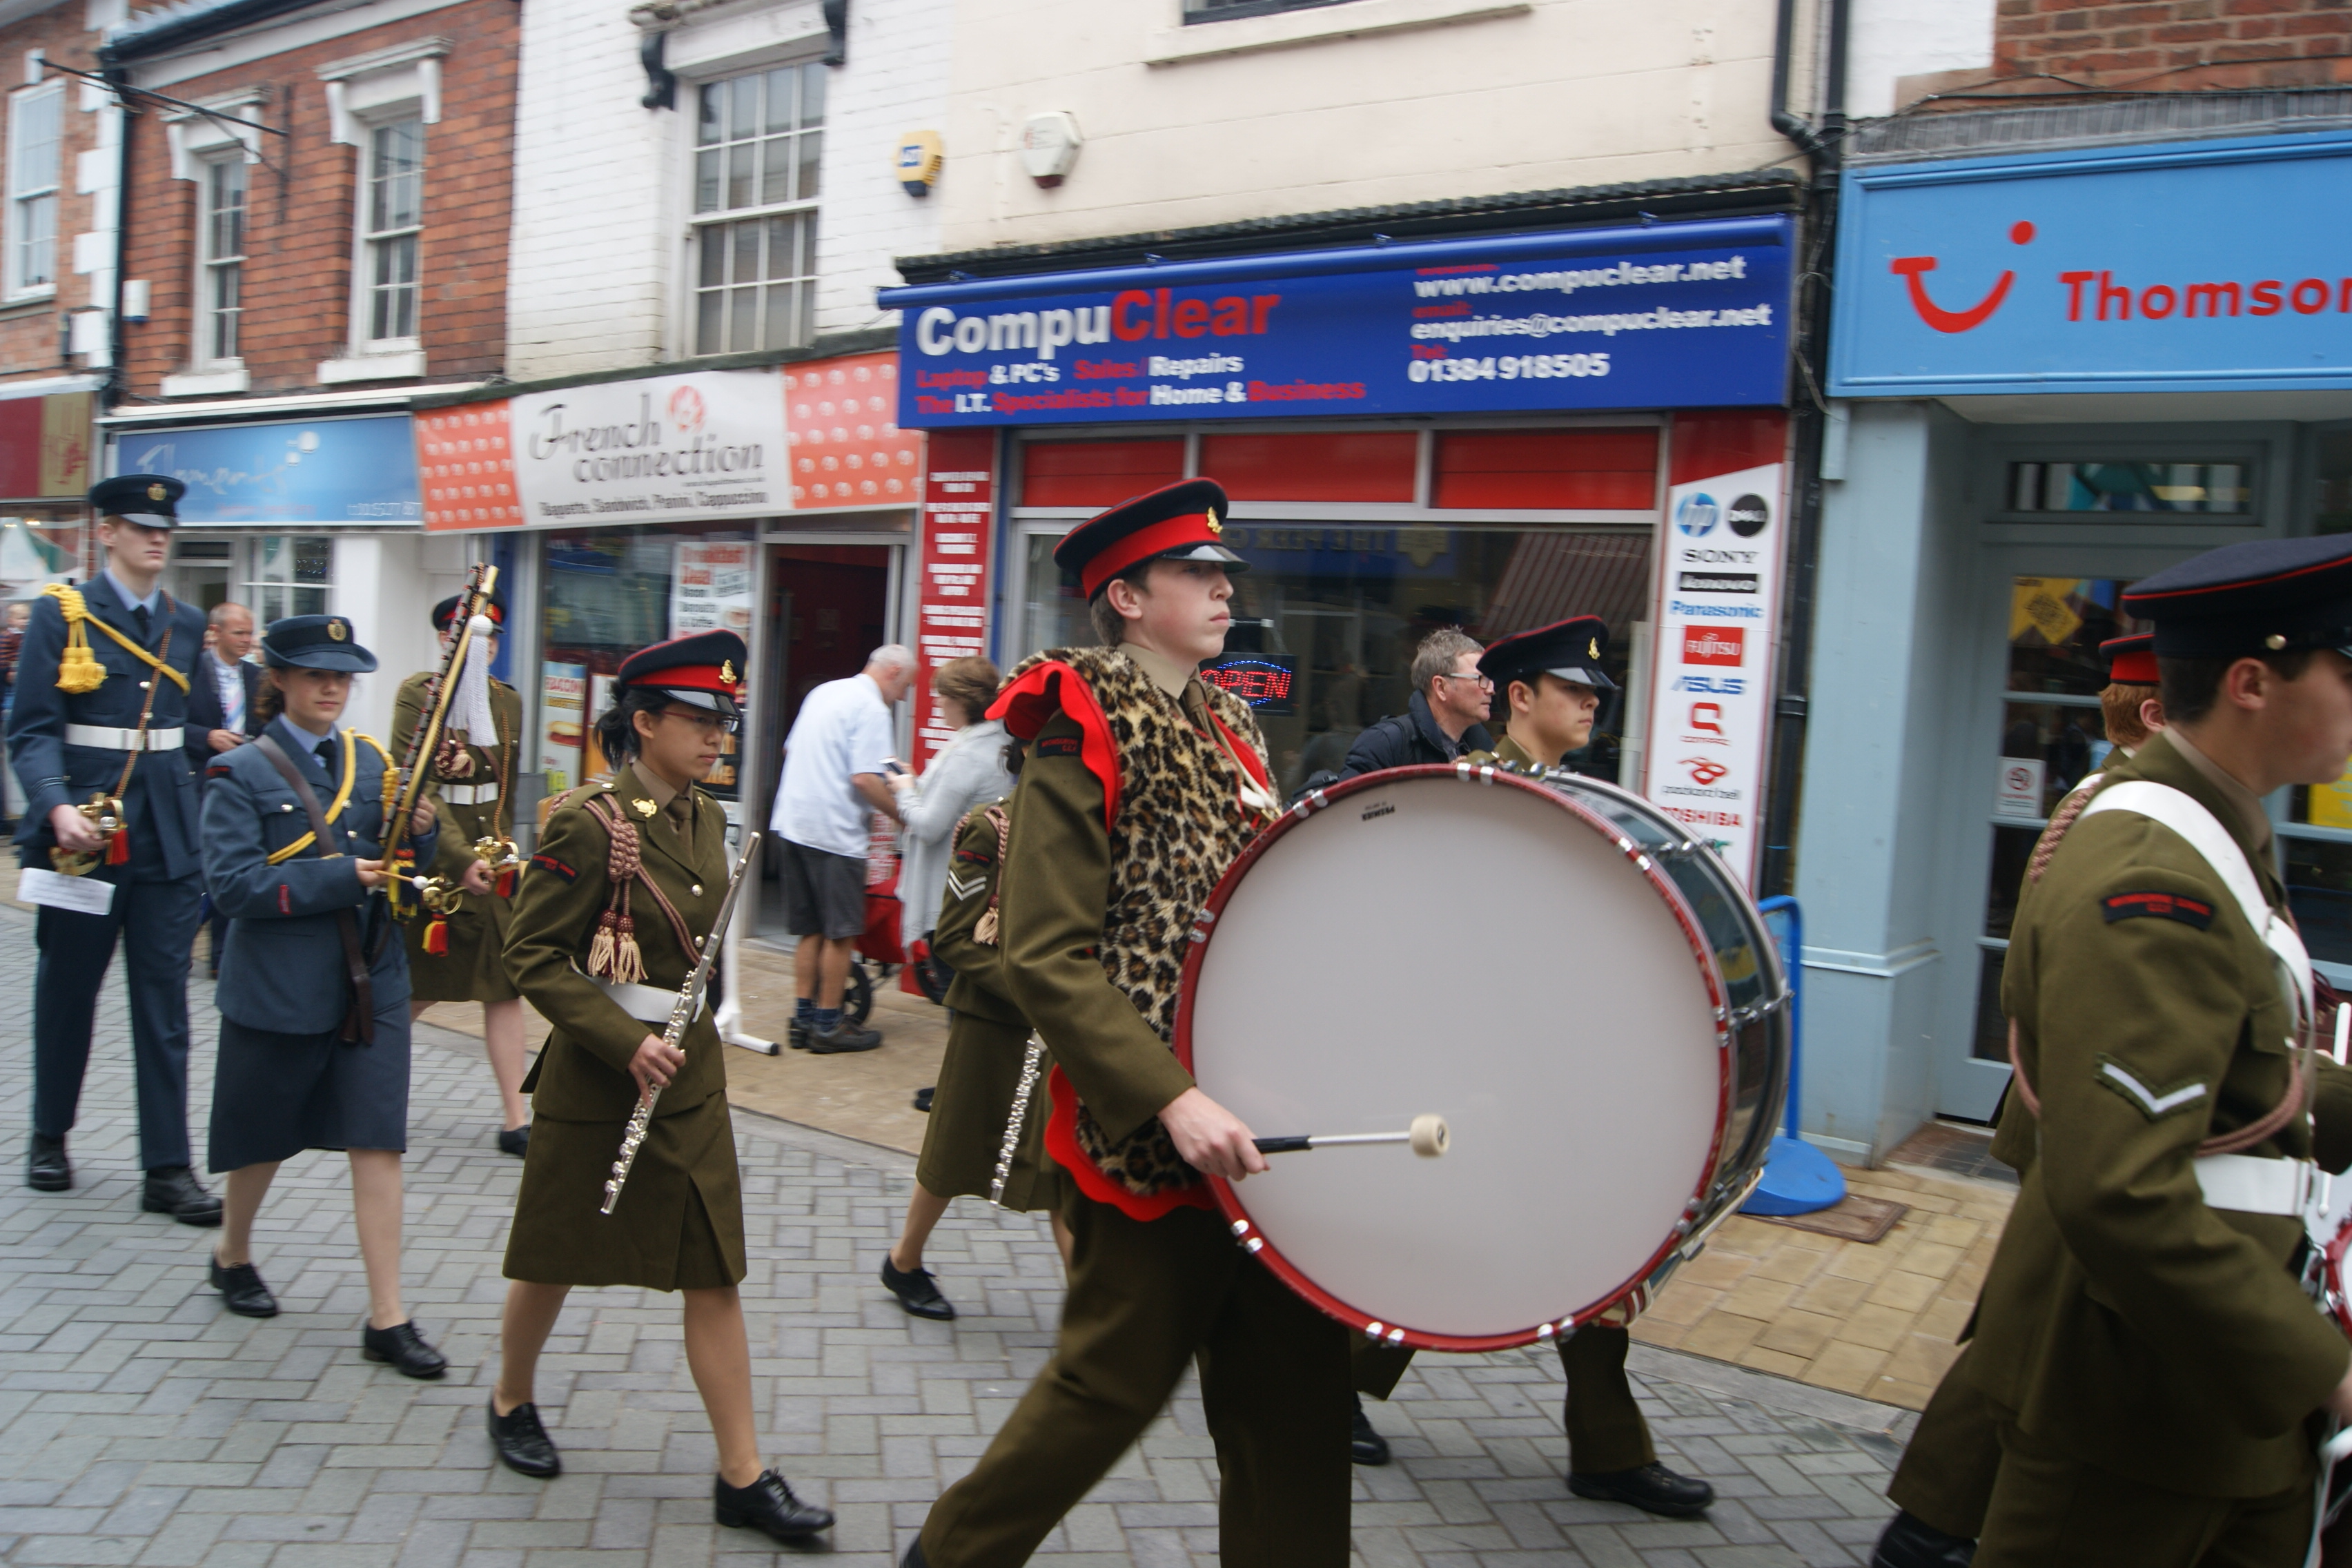 The Corps of Drums lead the procession during the Court Leet Fair Day, June 20th 2015